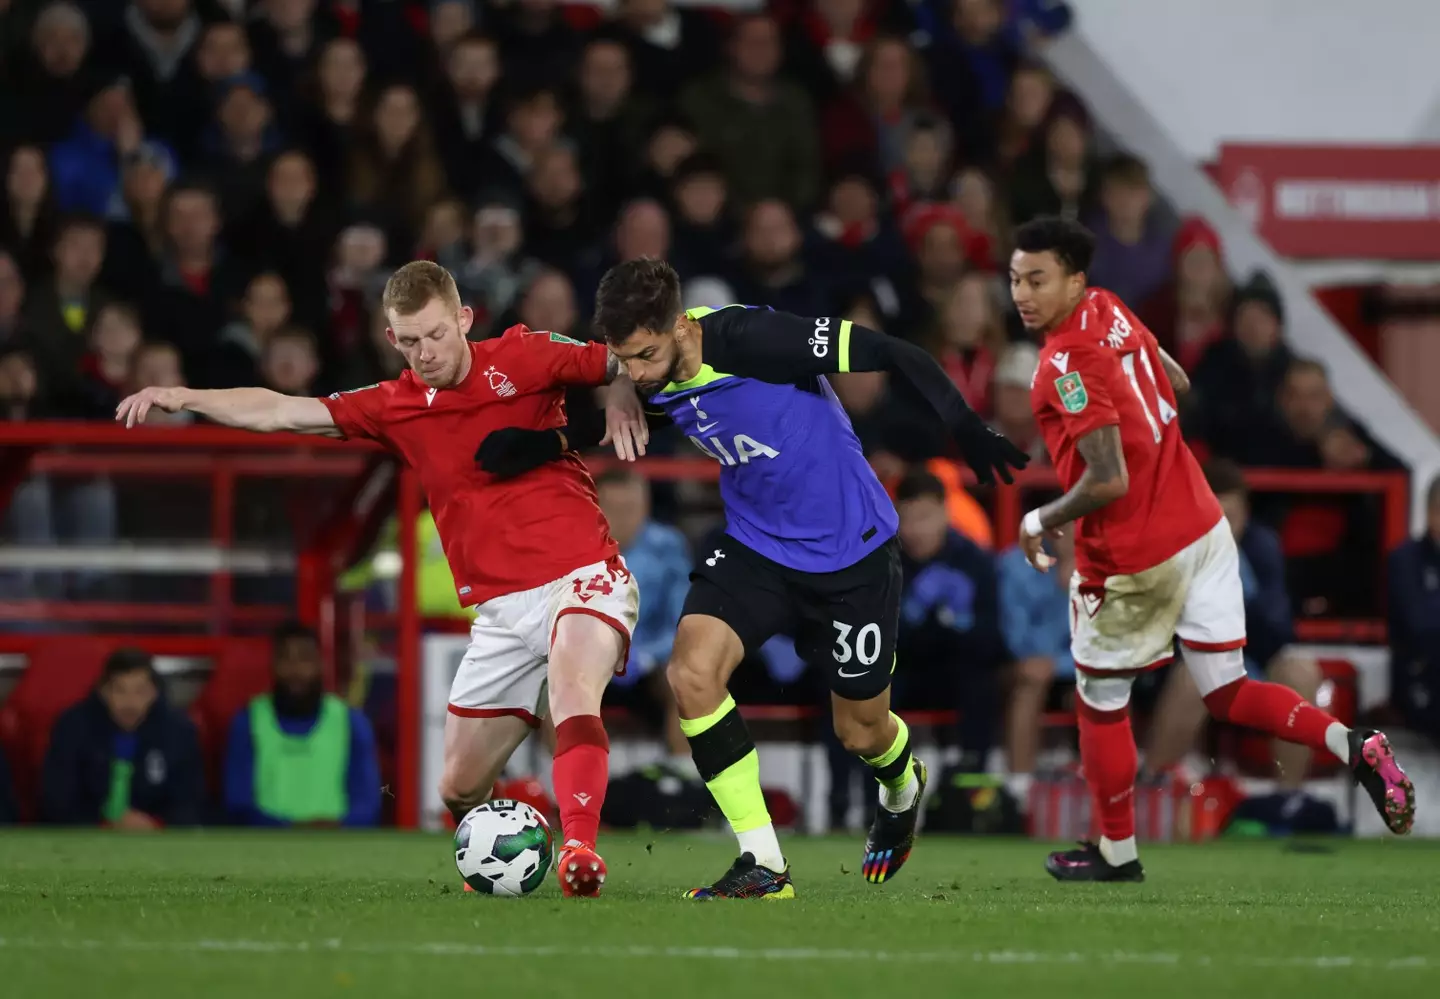 Lewis O'Brien has made 17 appearances for Forest this season. Image credit: Alamy